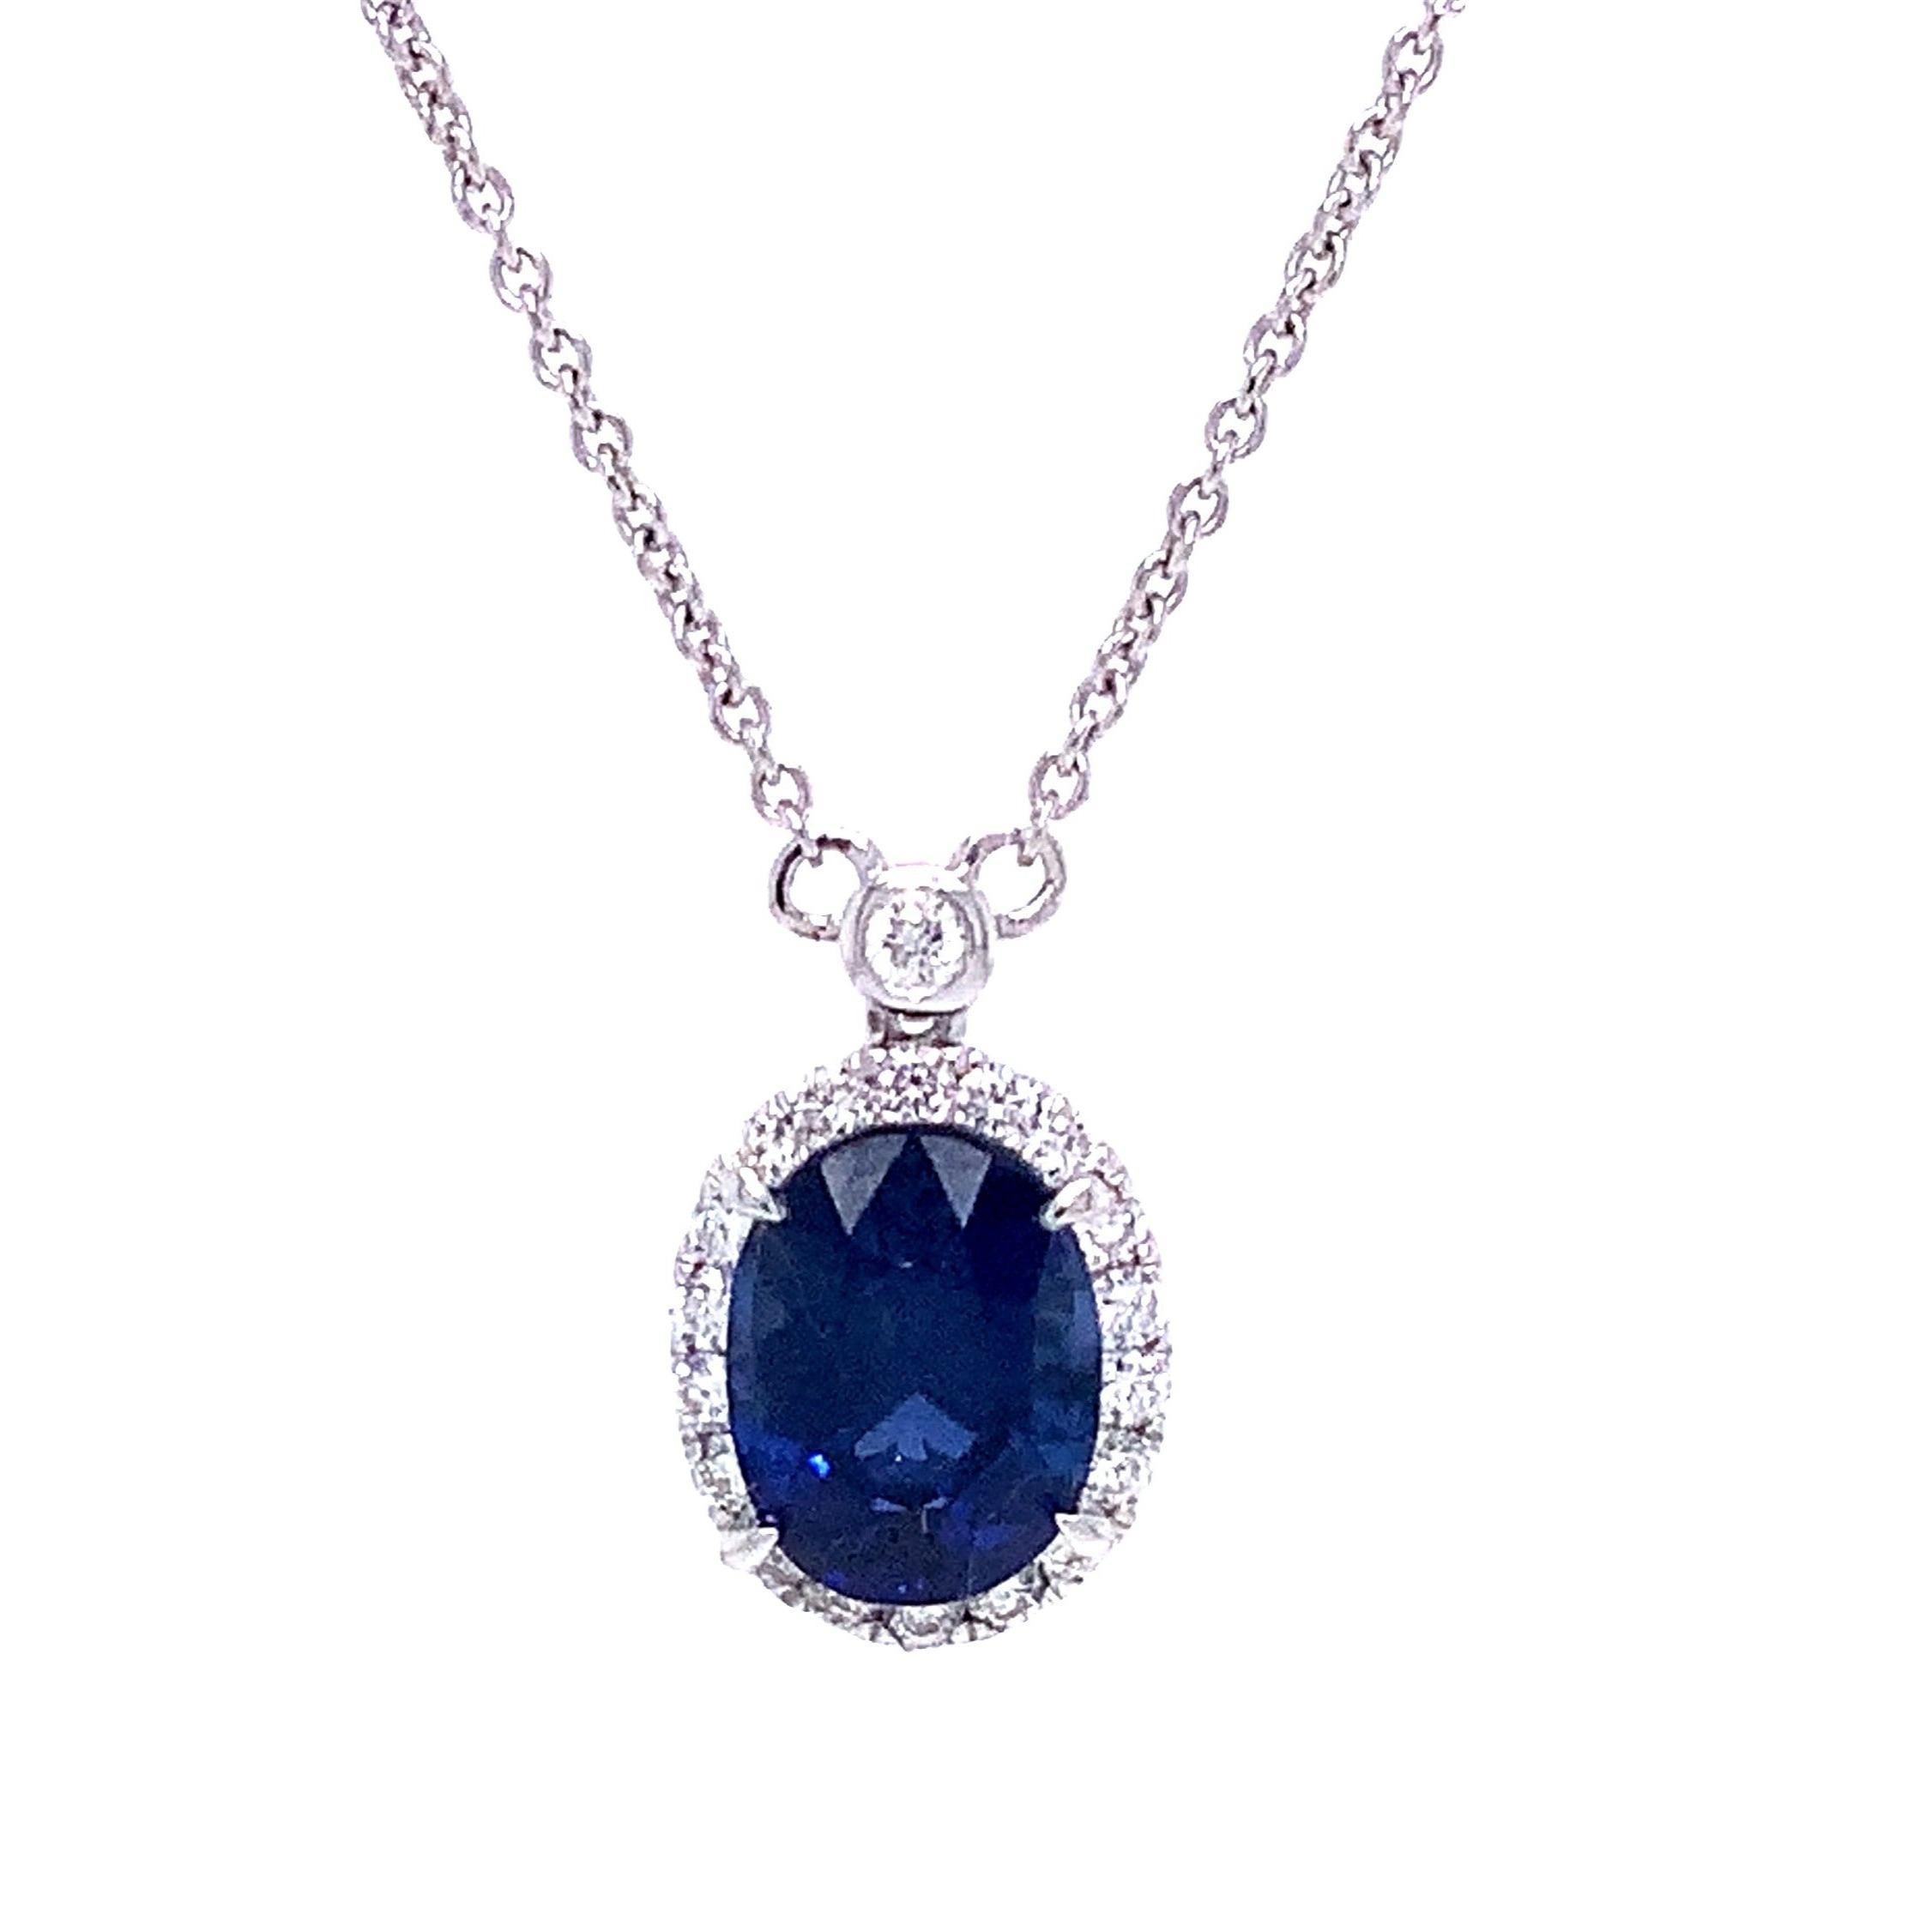 Roman + Jules Blue Sapphire and Diamond Necklace
Roman + Jules' Blue Sapphire and Diamond Necklace is a glamorous addition to your jewelry collection. A unique blend of blue sapphire and round diamonds, this necklace is crafted in 18K white gold and